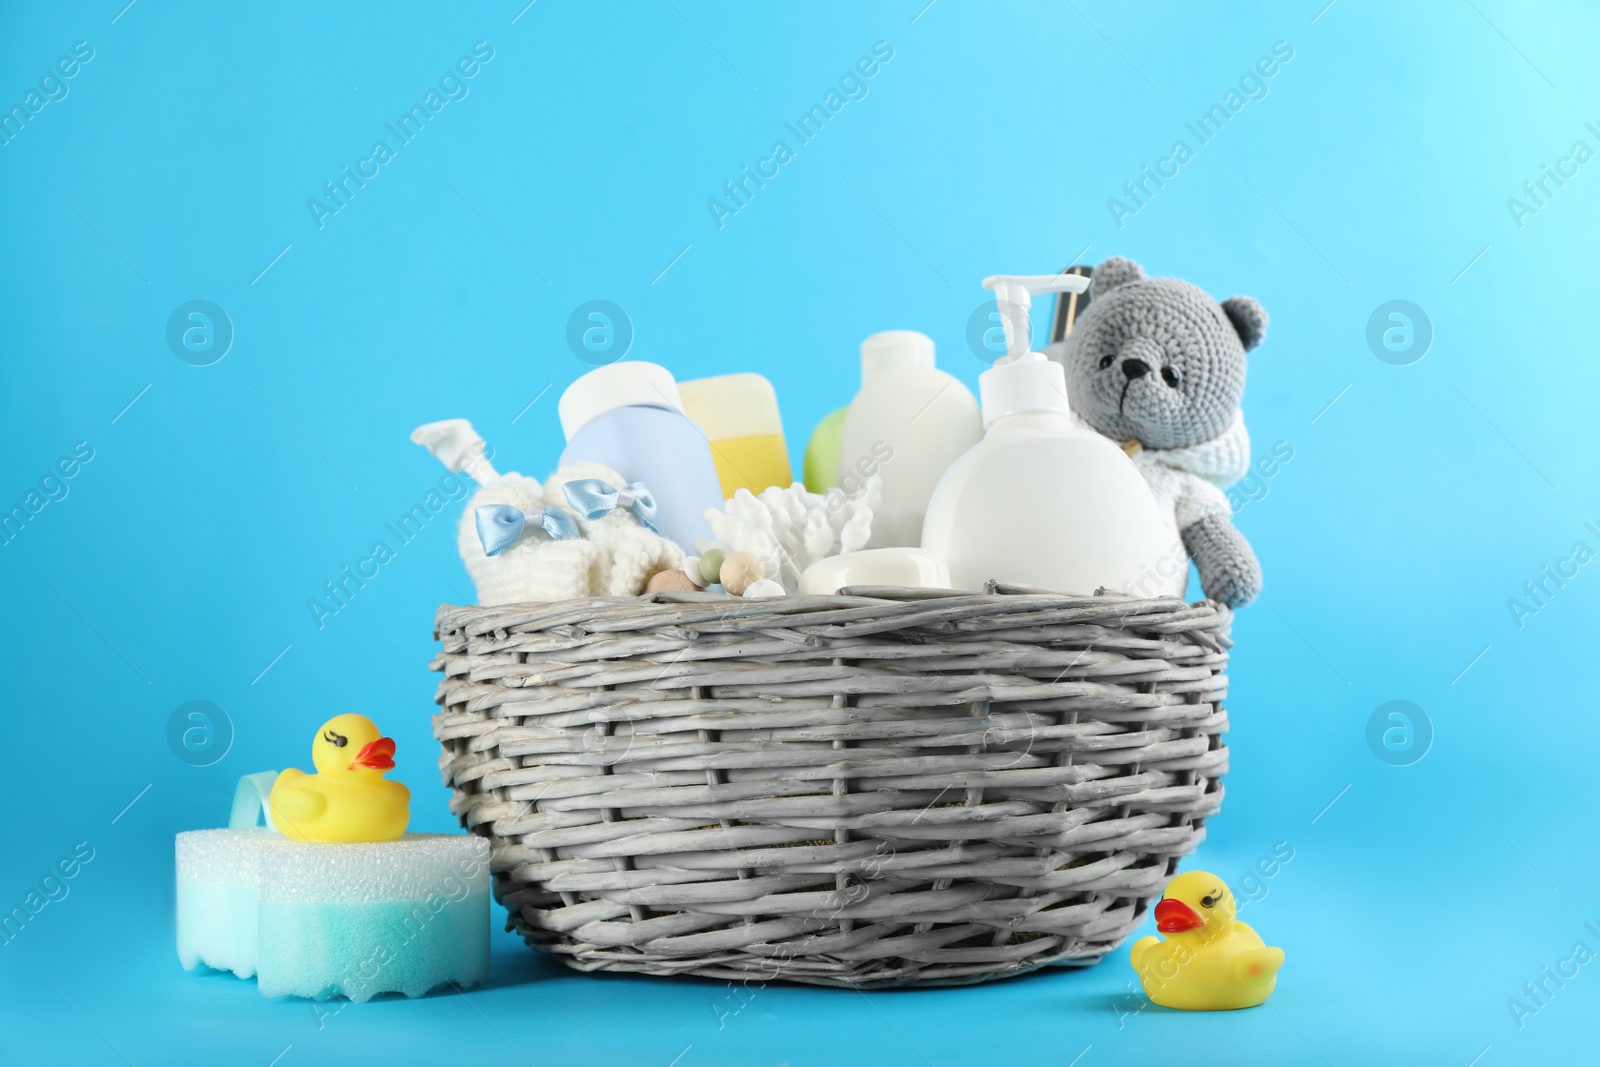 Photo of Wicker basket with different baby cosmetic products, bathing accessories and toys on light blue background